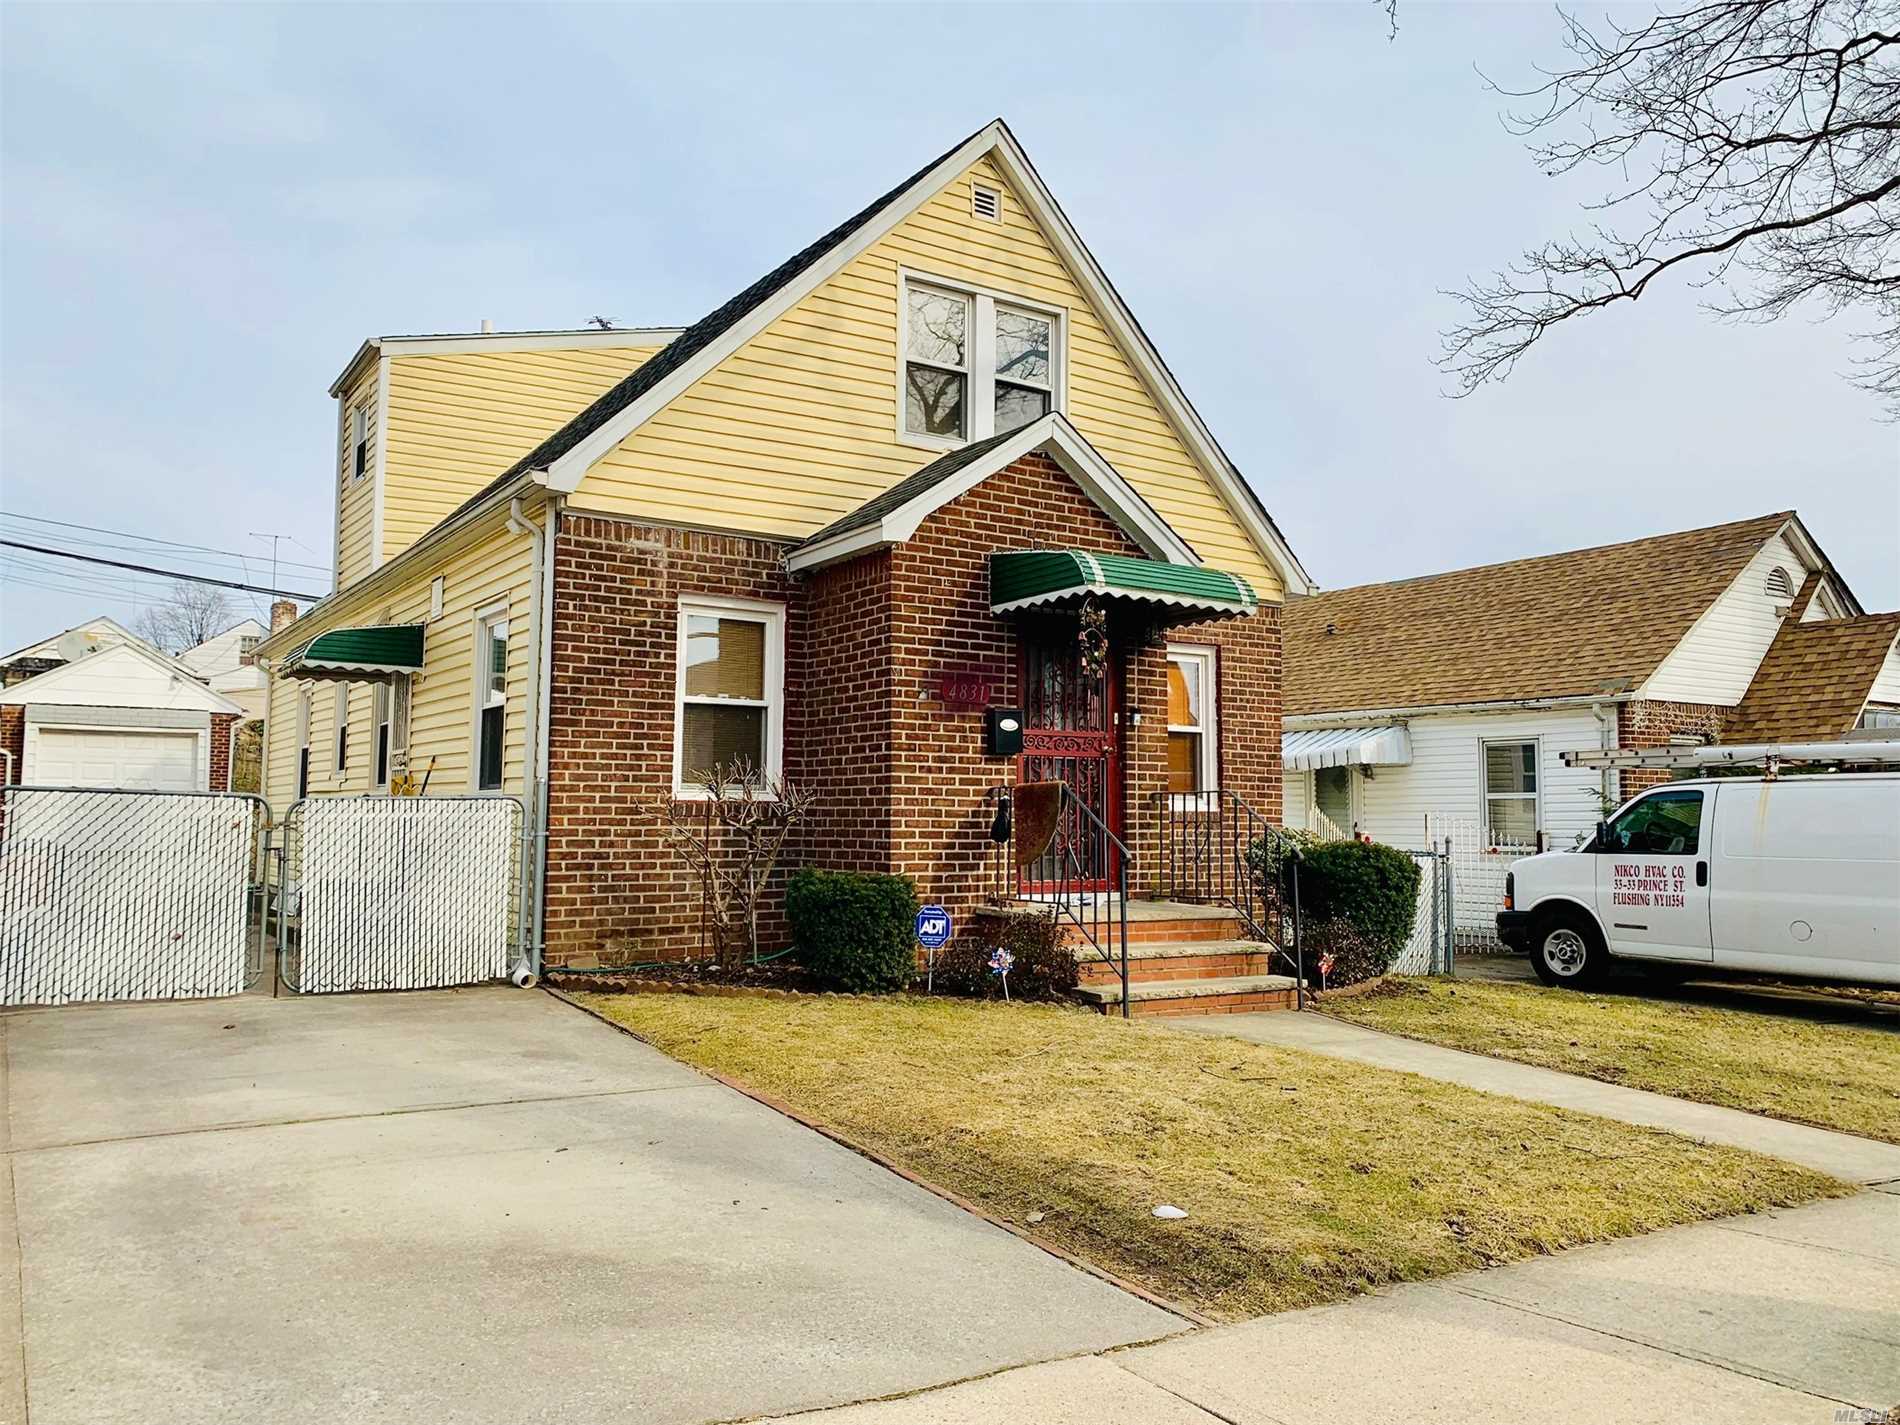 Newly Renovated Charming Oversized 1 Family In Heart Of Fresh Meadows. Lot Size Is 40X100. Building Size Is 22X38.5. Private Driveway With Garage. It Features Oversized 4 Bedroom With High Ceiling On The 2nd Fl, 2Full Ba, Lr And Kitchen. Updates Baths, Kitchen, Hardwood Floor, Basement, Boiler, Electric Wires And Circuit Box And Split Unit A/C Were Done 4.5 Years Ago. Great School District Zoned In #26. Just Mins Away From Bus, I495, Park, School And Supermarkets Etc....